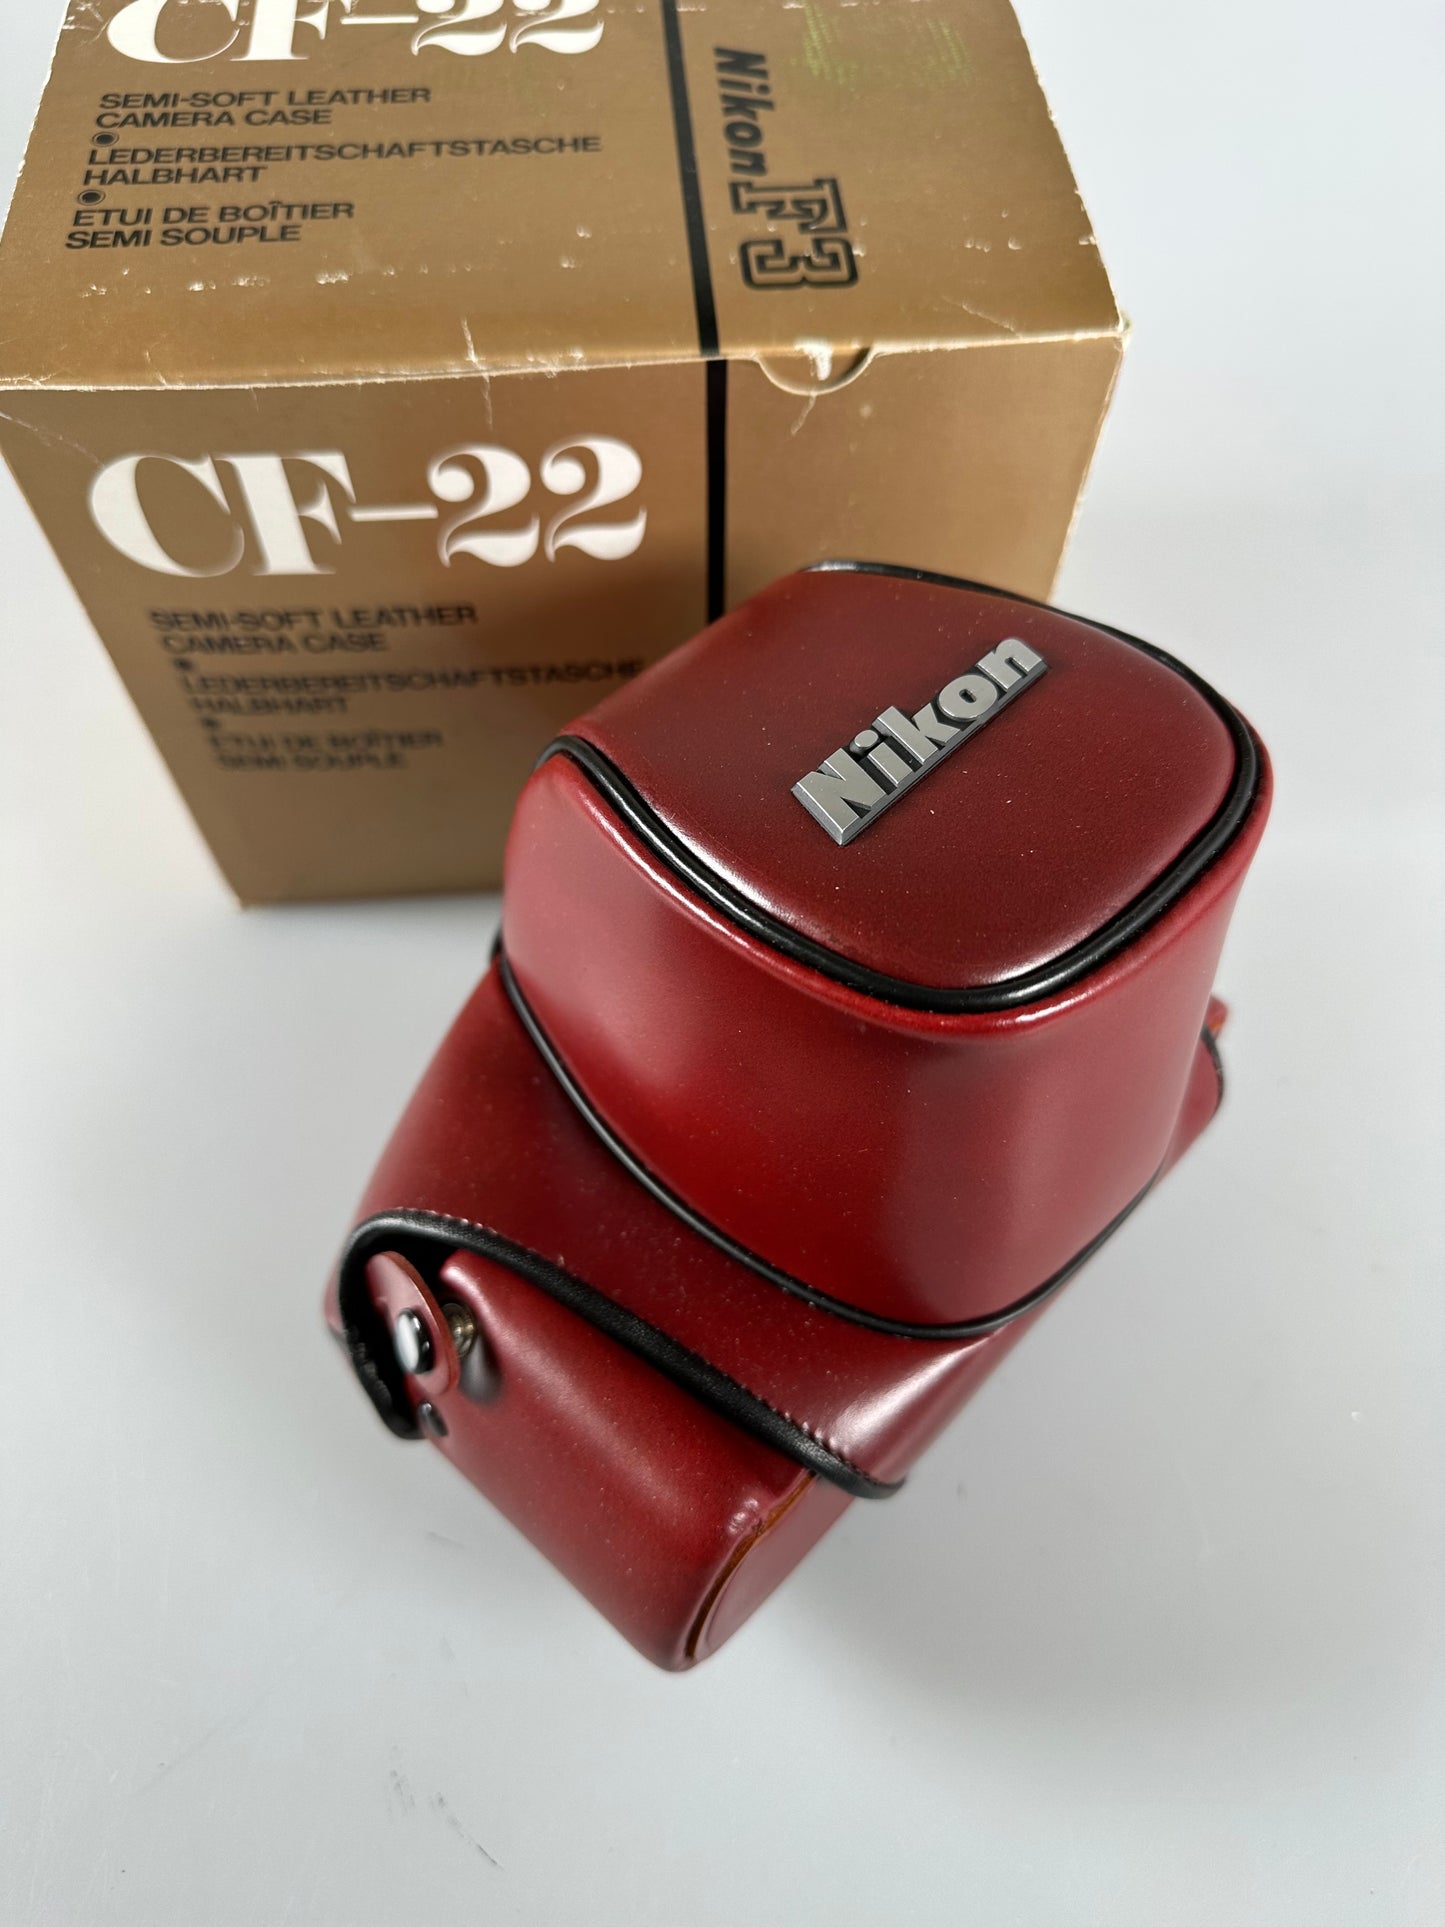 Nikon CF-22 Red Brown Ever Ready Case for Nikon F3 F3HP F3T